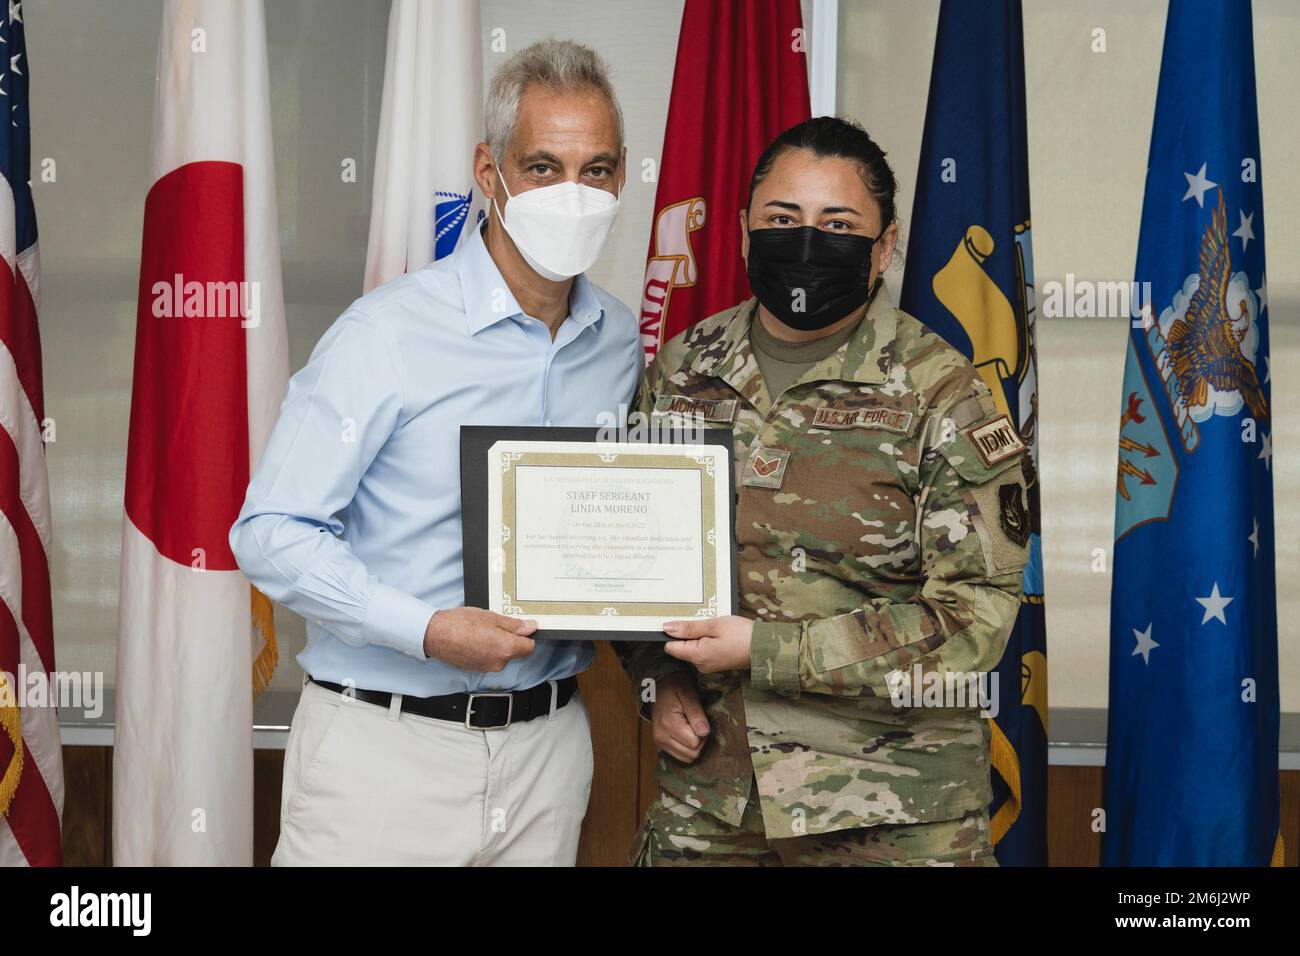 Rahm Emanuel, the U.S. ambassador to Japan, awards U.S. Air Force Staff Sgt. Linda Moreno, a medical technician with 44th Fighter Squadron, 18th Wing, during a recognition luncheon on Camp Foster, Okinawa, Japan, on April 28, 2022. Moreno received a challenge coin for providing life-saving medical care to a Japanese man on a train after he passed out due to possible hypoglycemia at the Yukohashi Train Station, Fukuoka, Japan on March 28, 2022. During Ambassador Emanuel's visit to Okinawa, he took the time to recognize service members and on-base local national employees for their heroic acts a Stock Photo